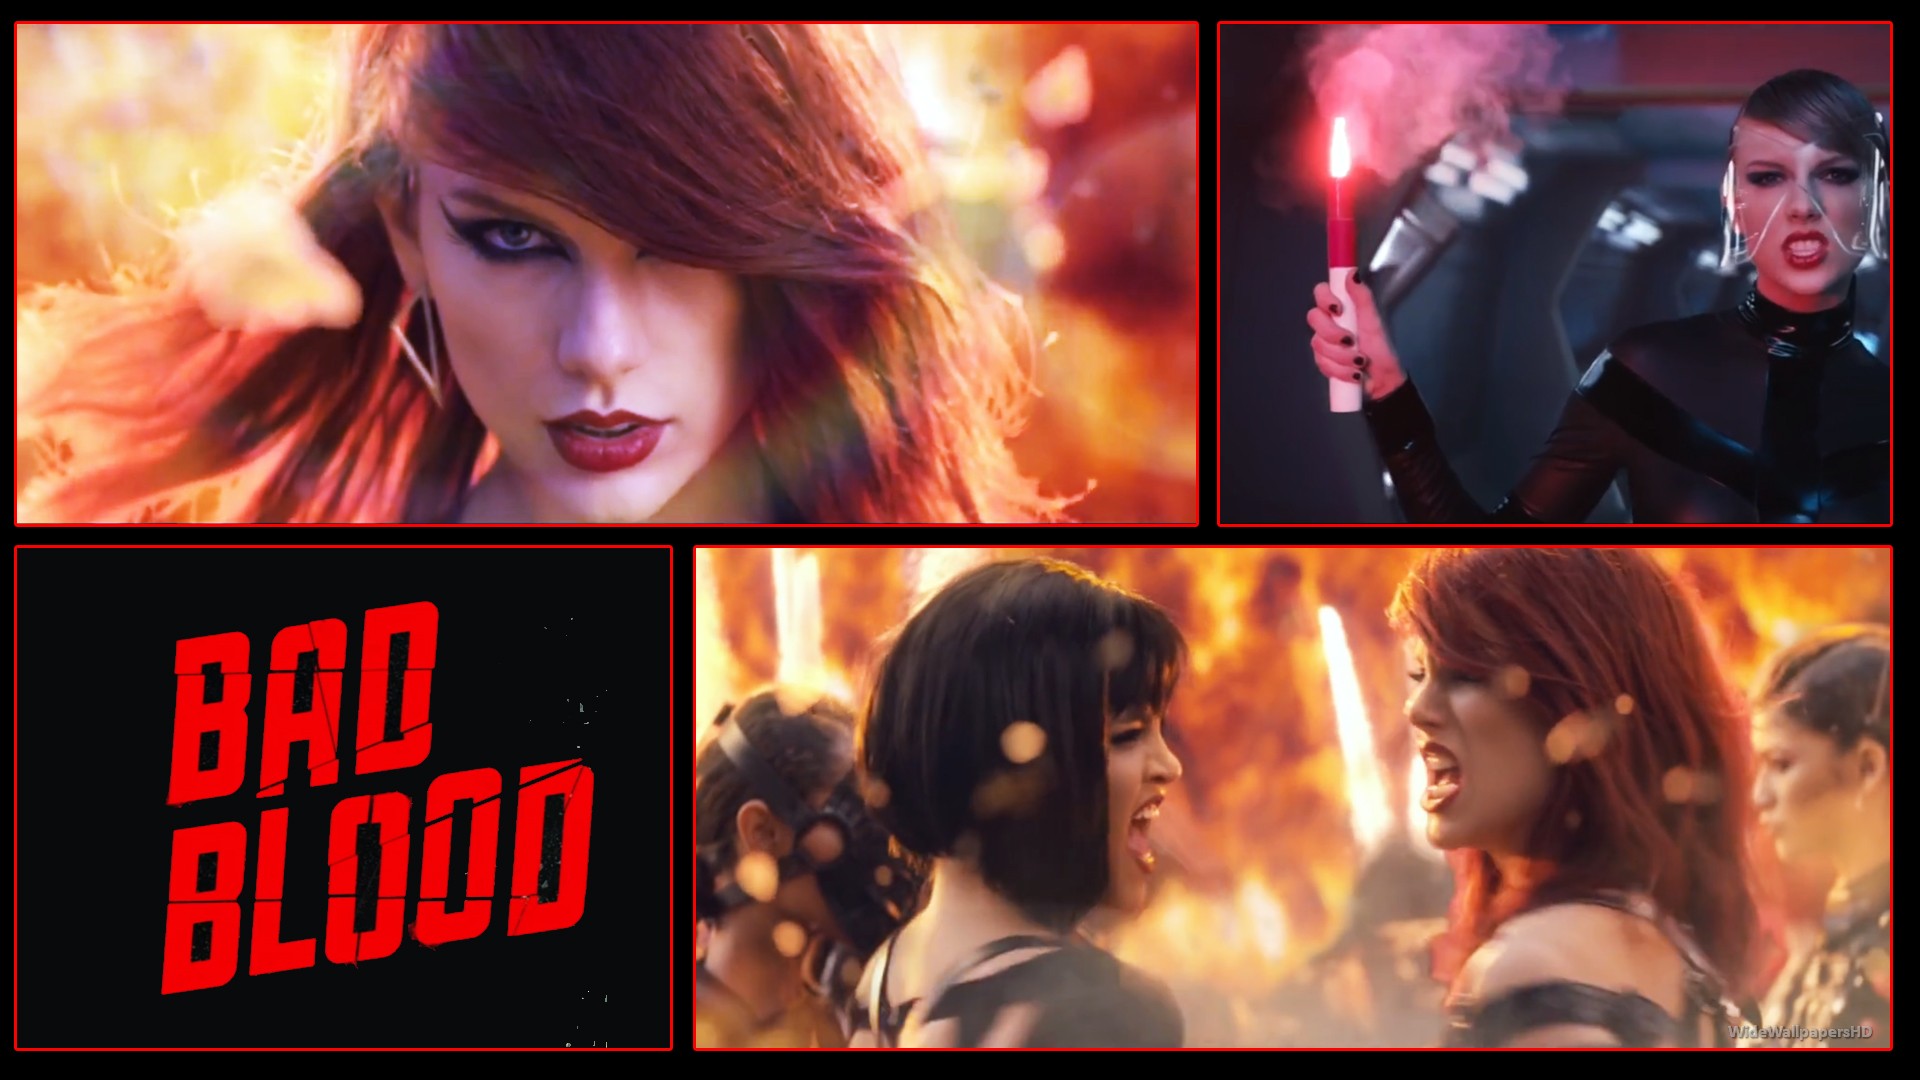 taylor swift song Bad Blood Taylor Swift Songs 11 Wallpapers 1920x1080